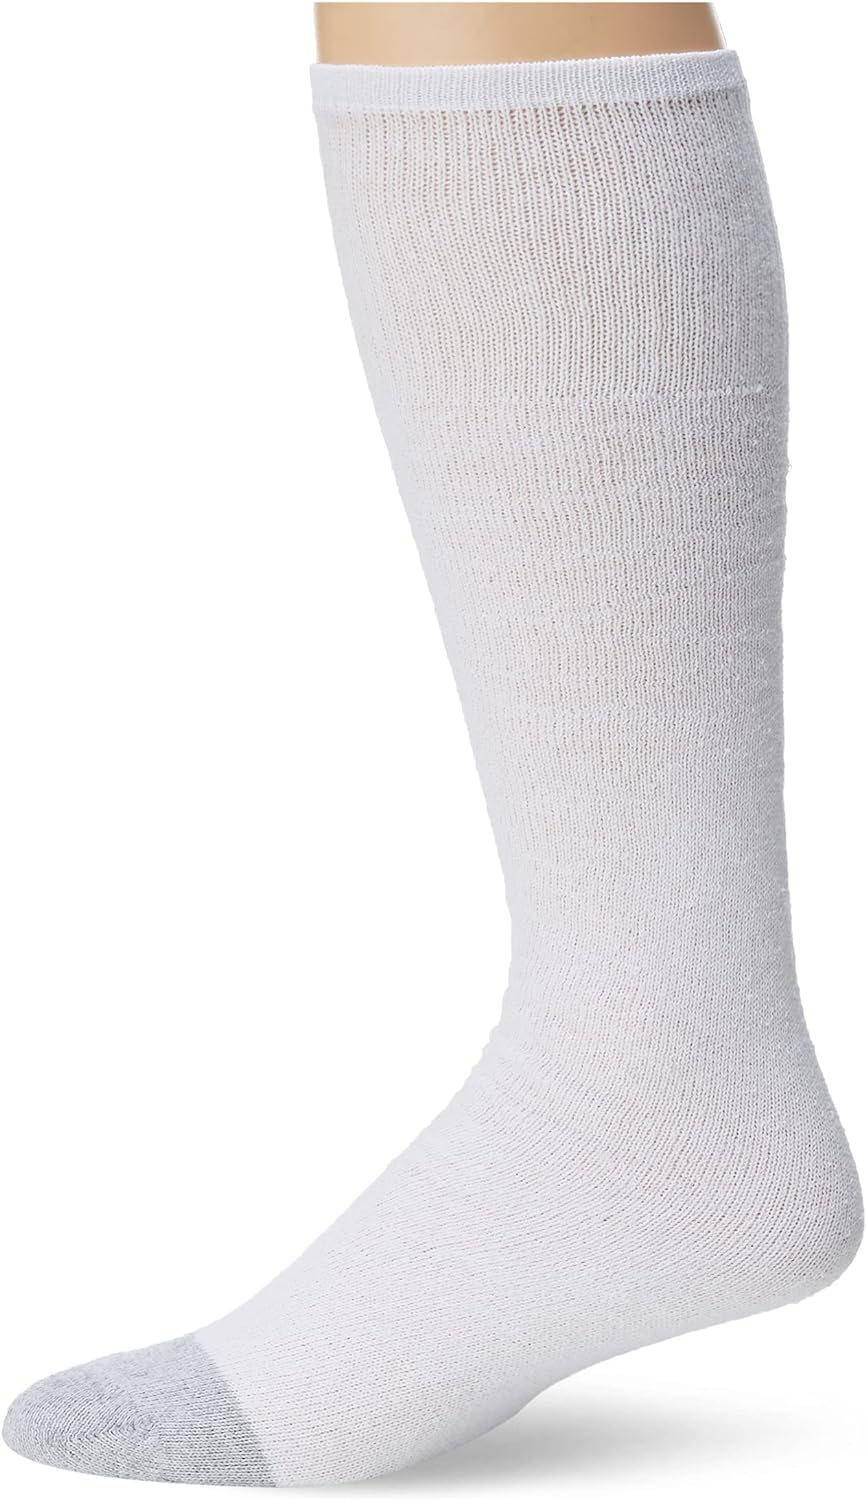 Fruit of the Loom mens Essential 6 Pair Pack Casual Cushioned fashion liner socks, White, 6.5-12 US - pack of 6